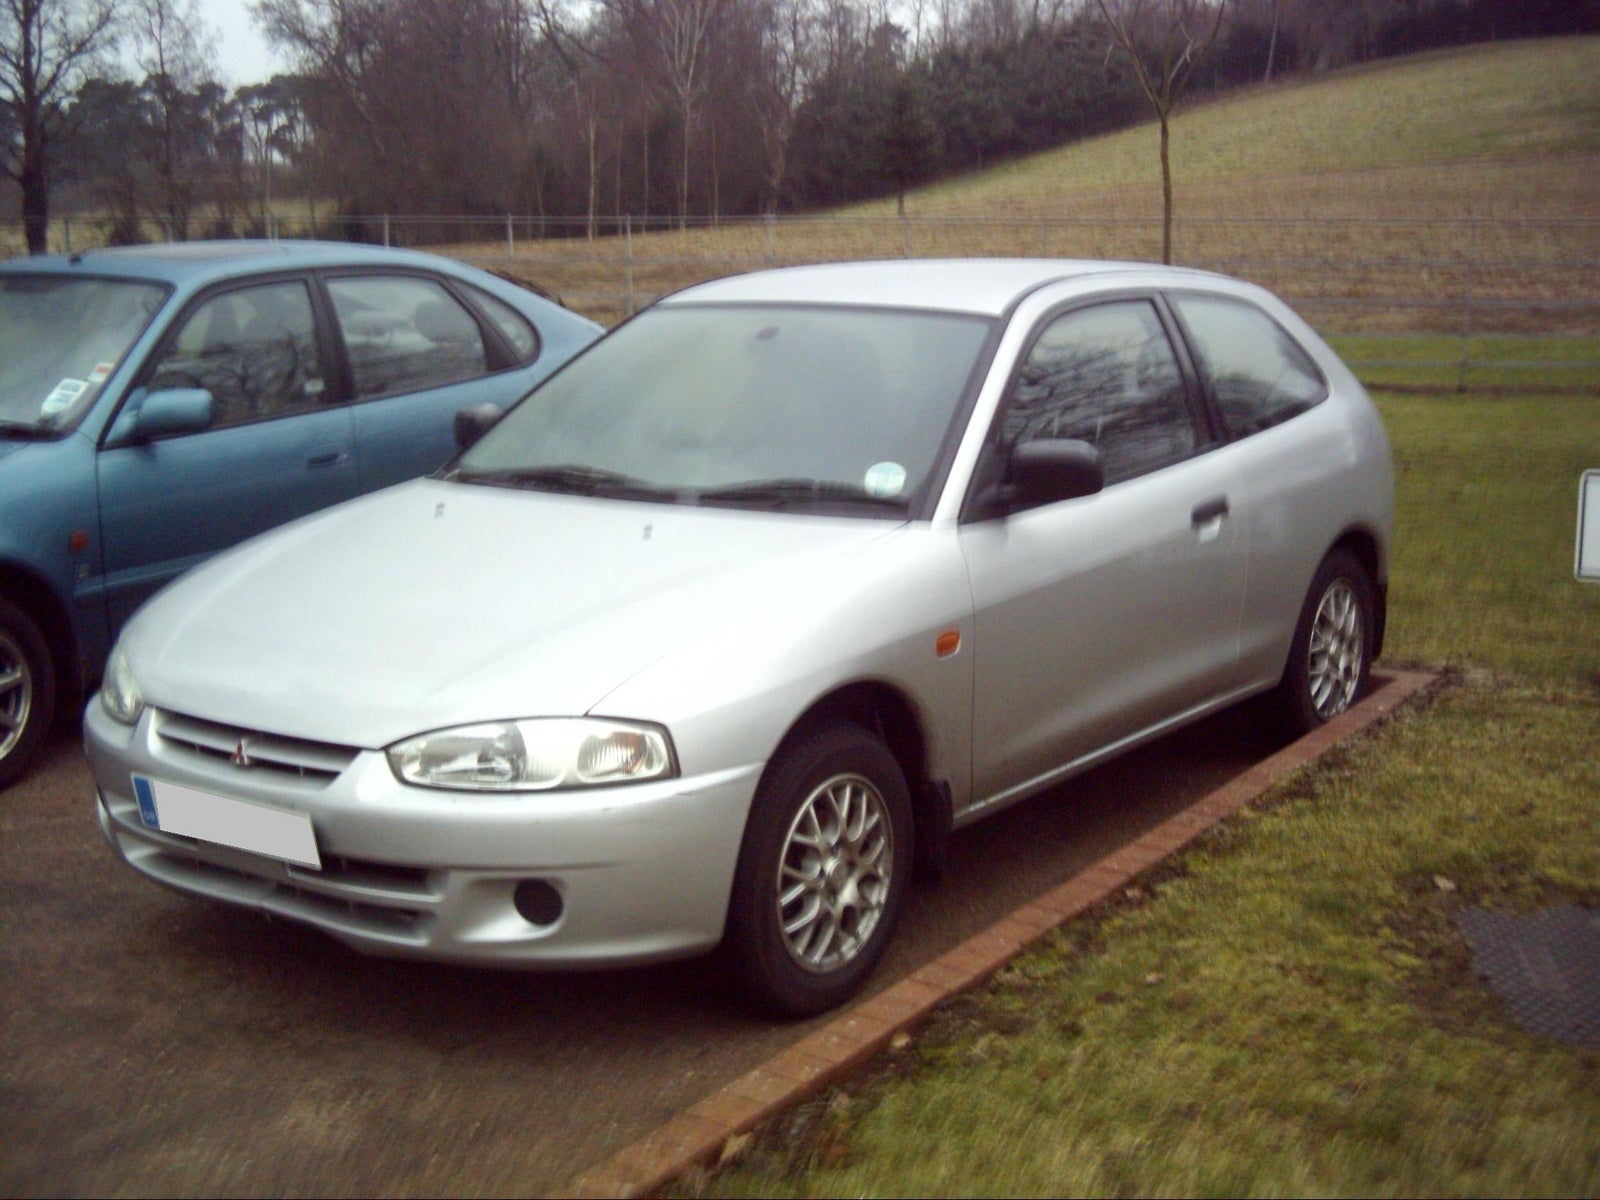 1999 Mitsubishi Colt Other Pictures CarGurus